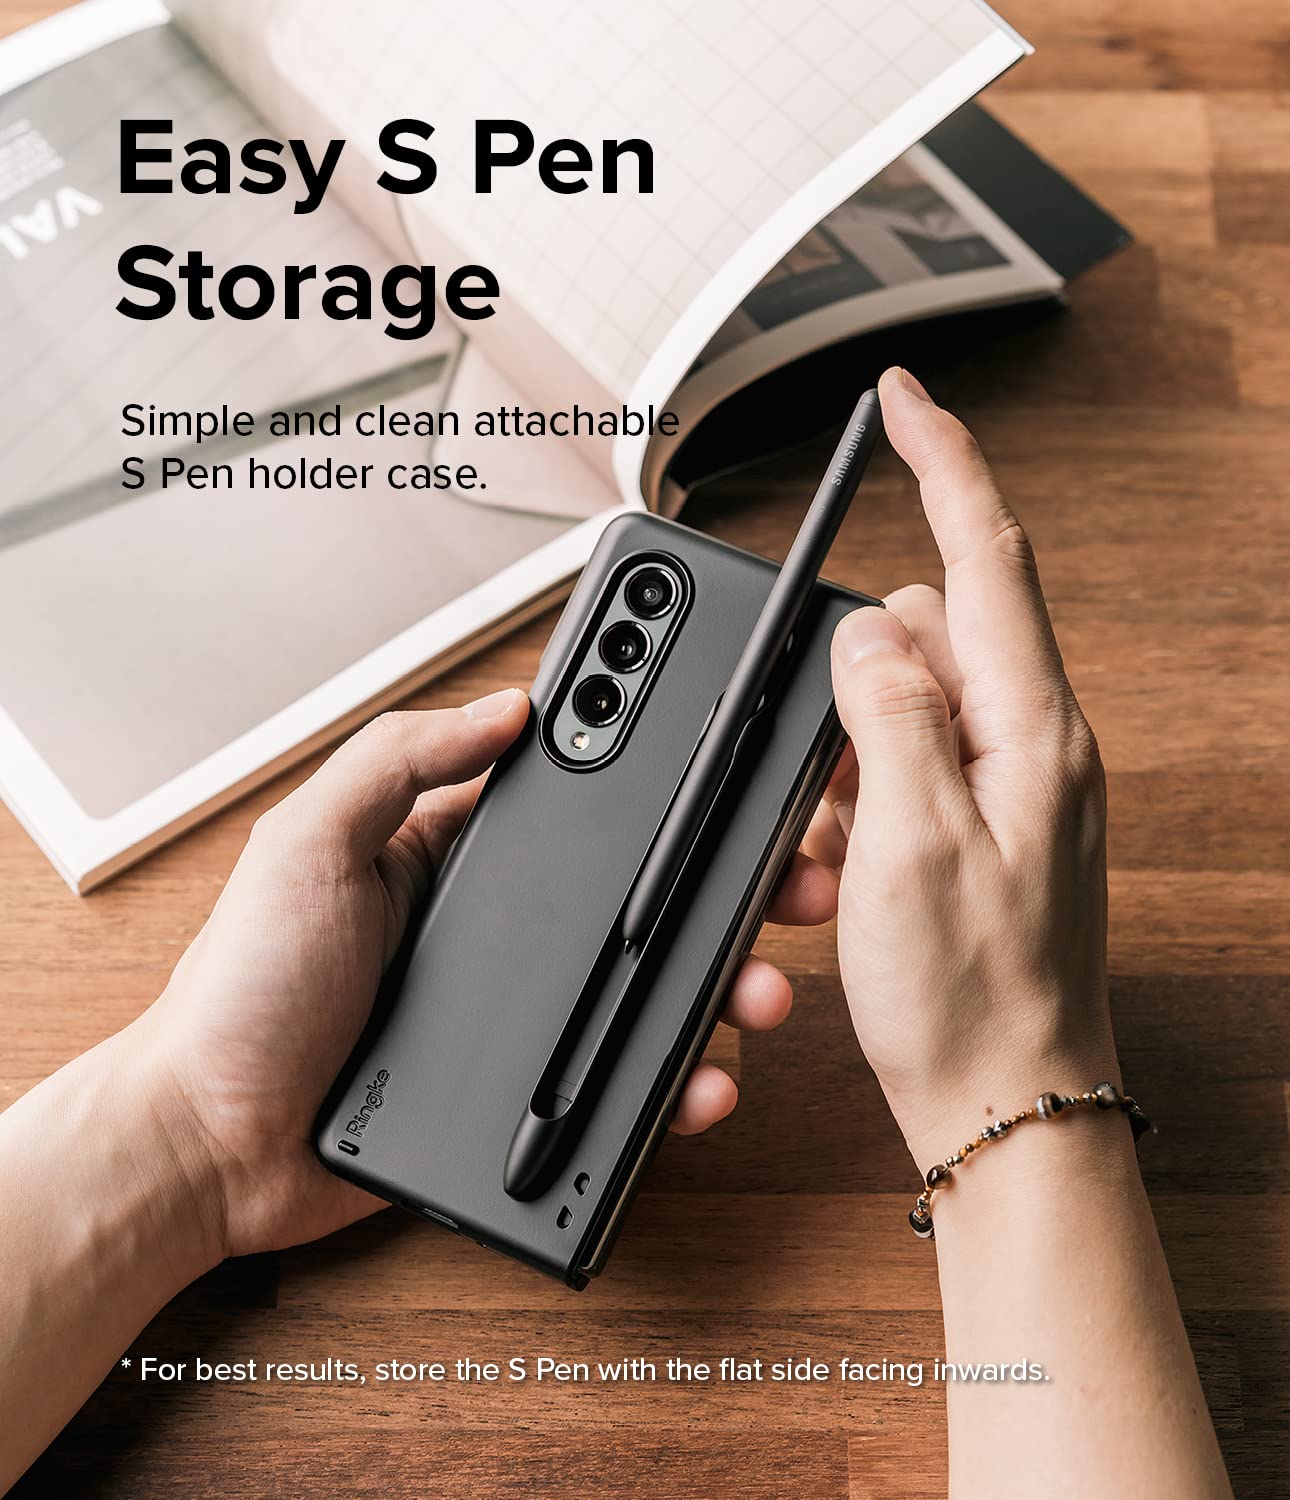 For Samsung Galaxy Z Fold 4 3 Cover with S Pen Slot Wrist Strap Hard Case